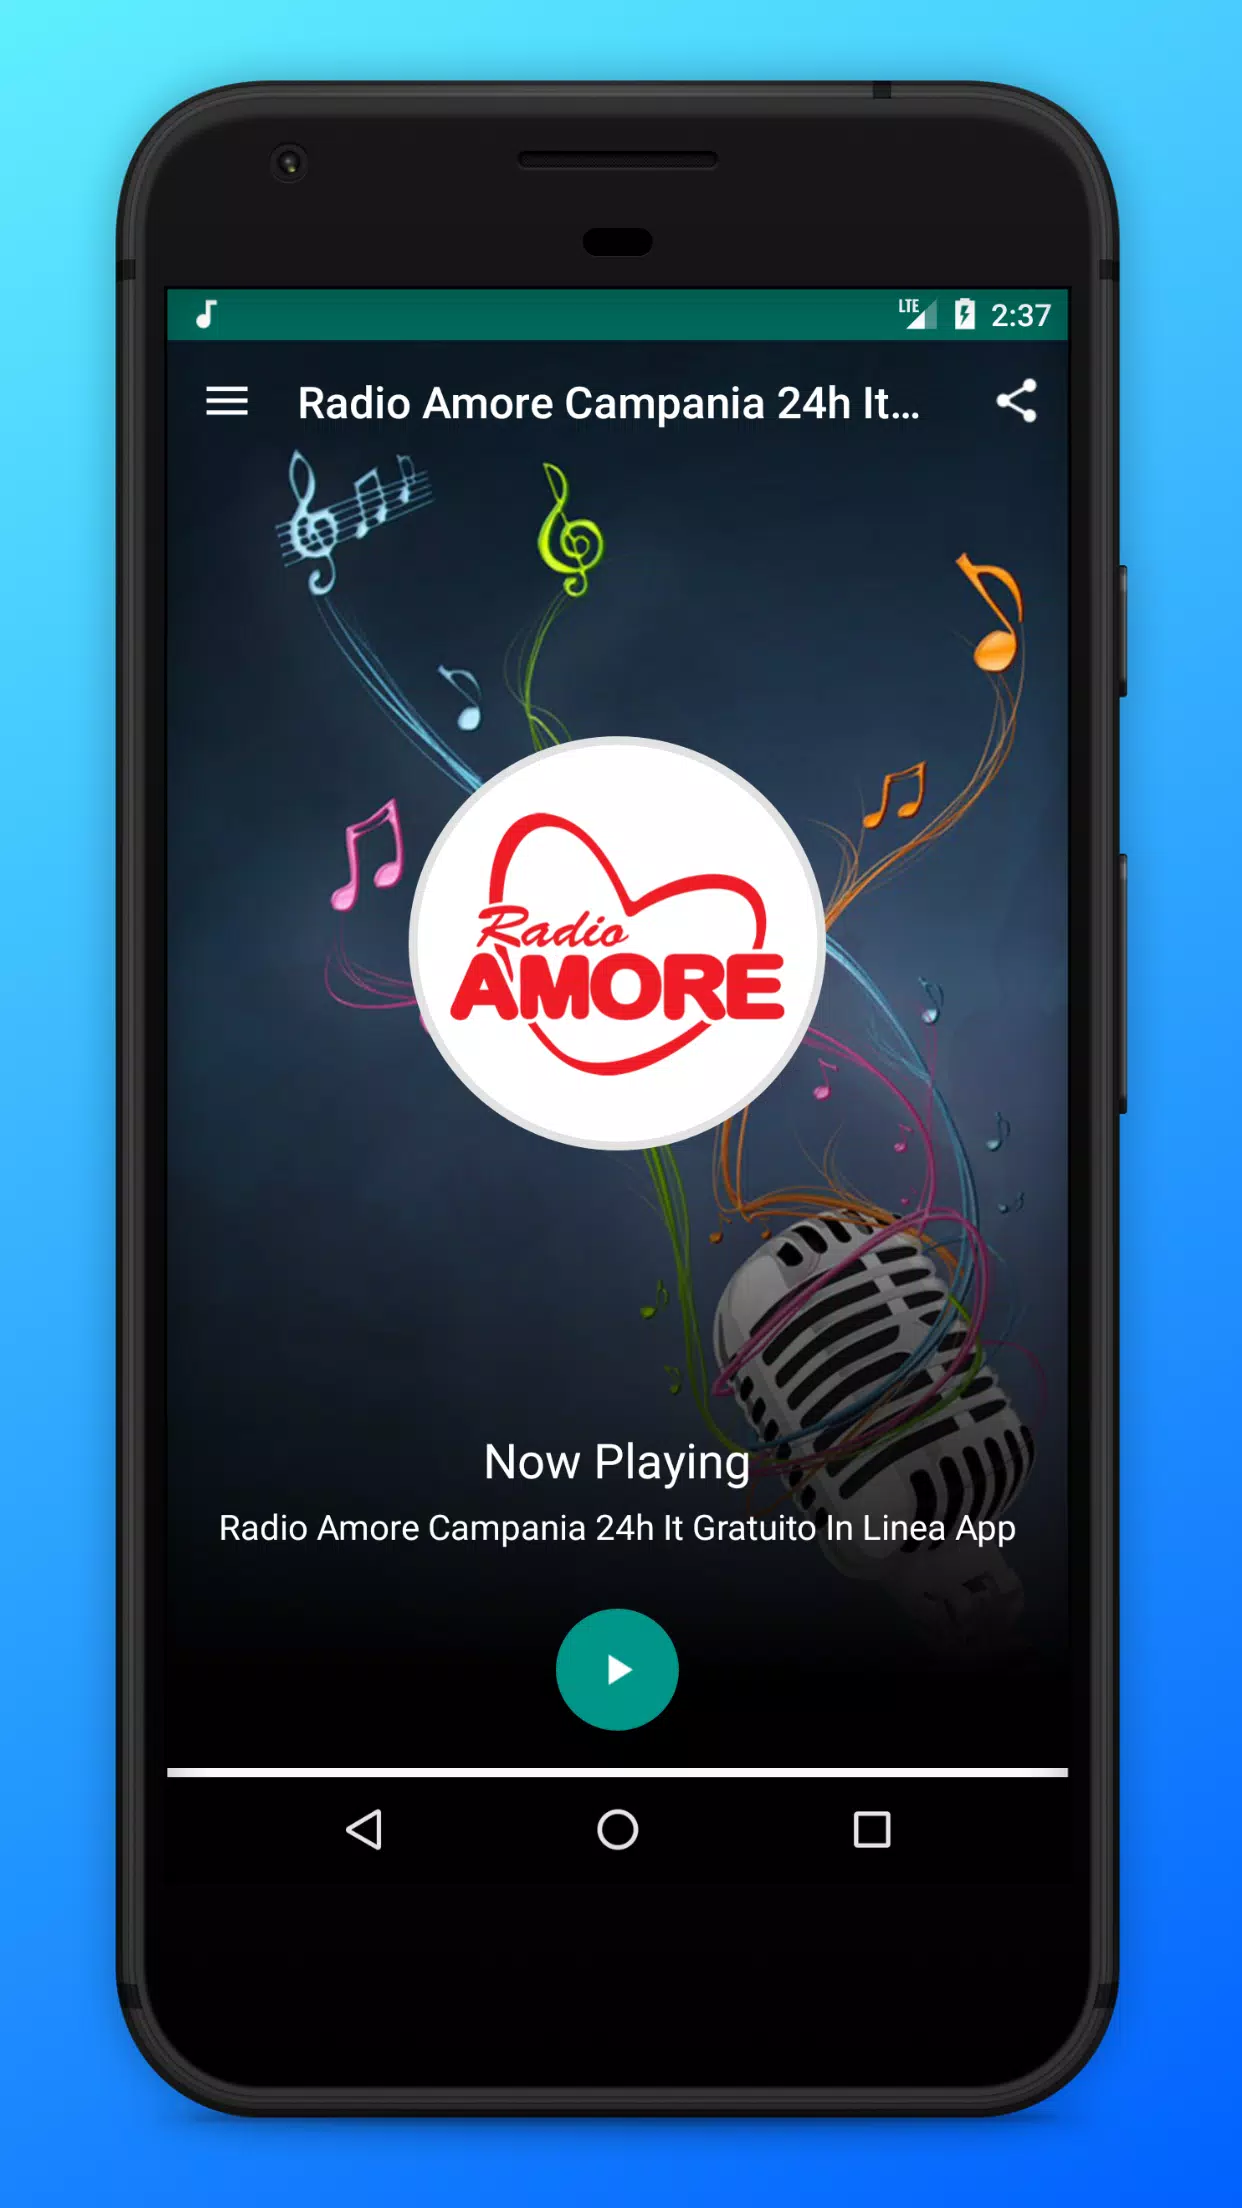 Radio Amore Campania 24h It Free Online App for Android - APK Download